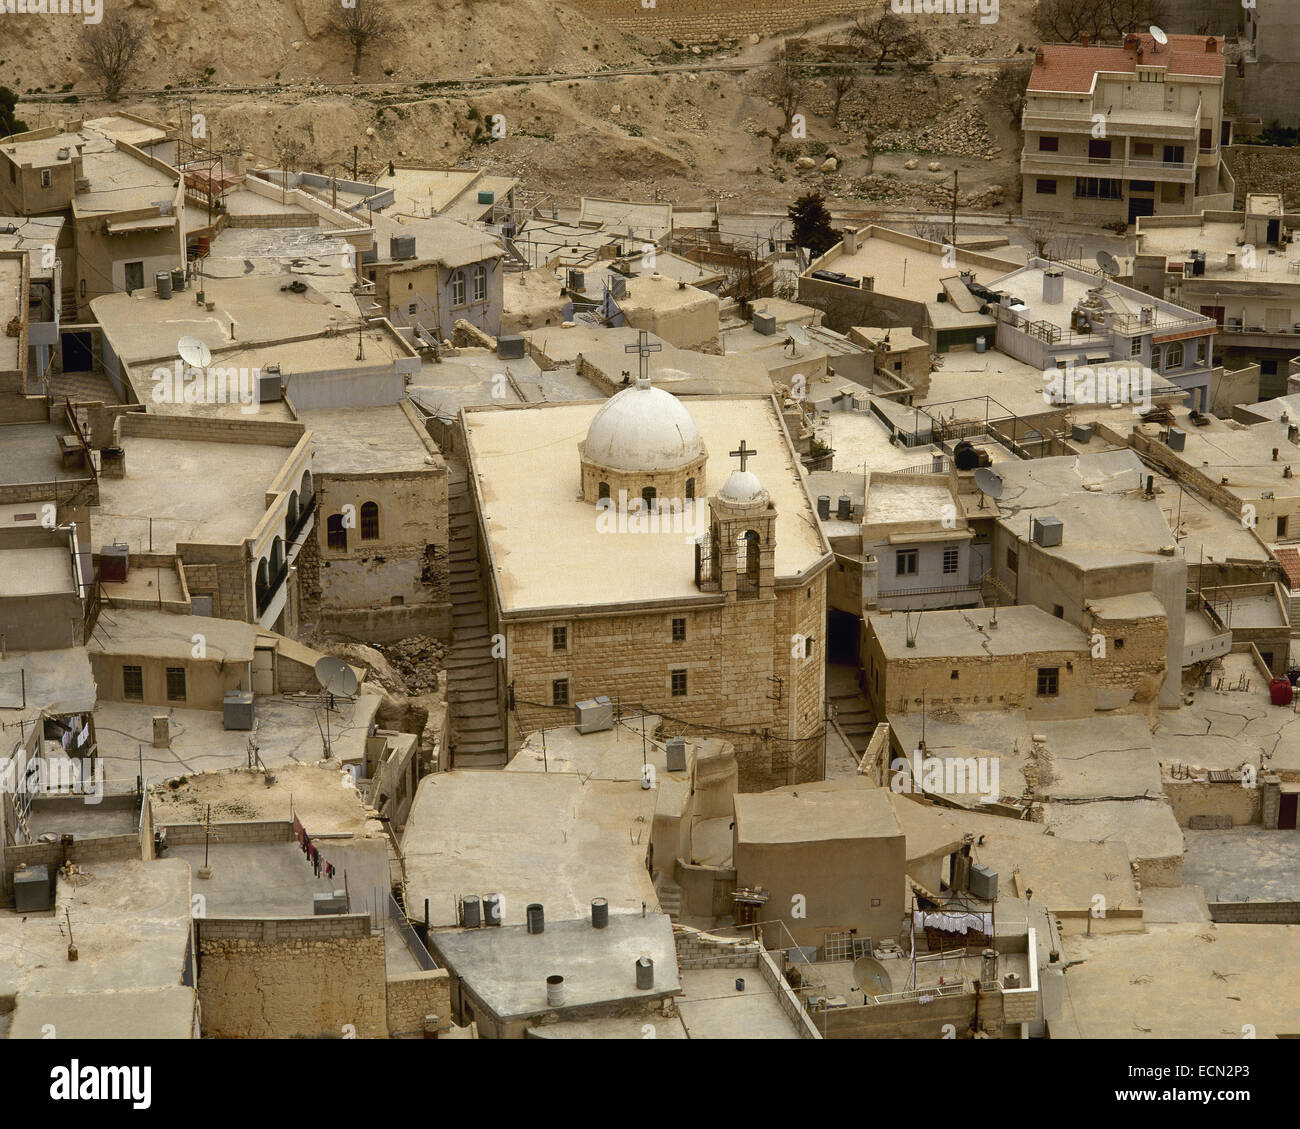 Syria. Ma´loula. Town built into the rugged mountainside. Village where Western Aramaic is still spoken. Near East. Photo before Syrian Civil War. Stock Photo